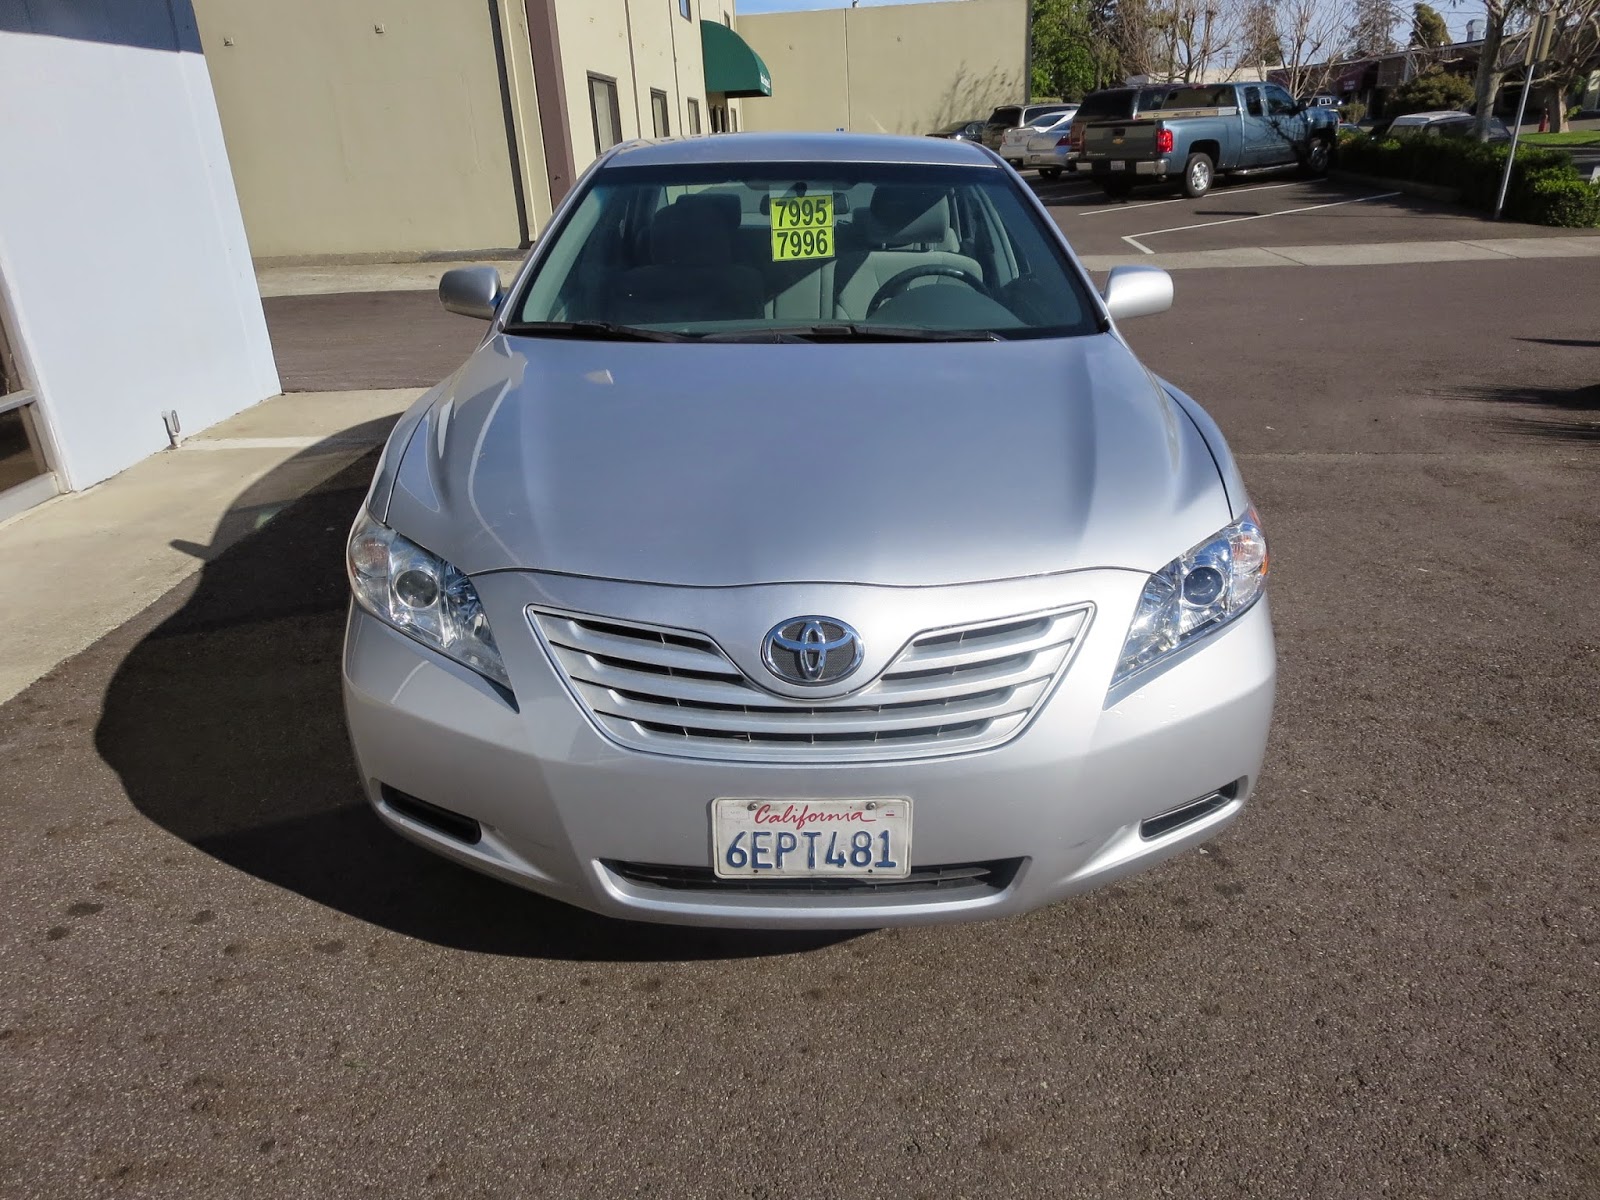 Auto body repairs on 2009 Toyota Camry in Fremont, CA